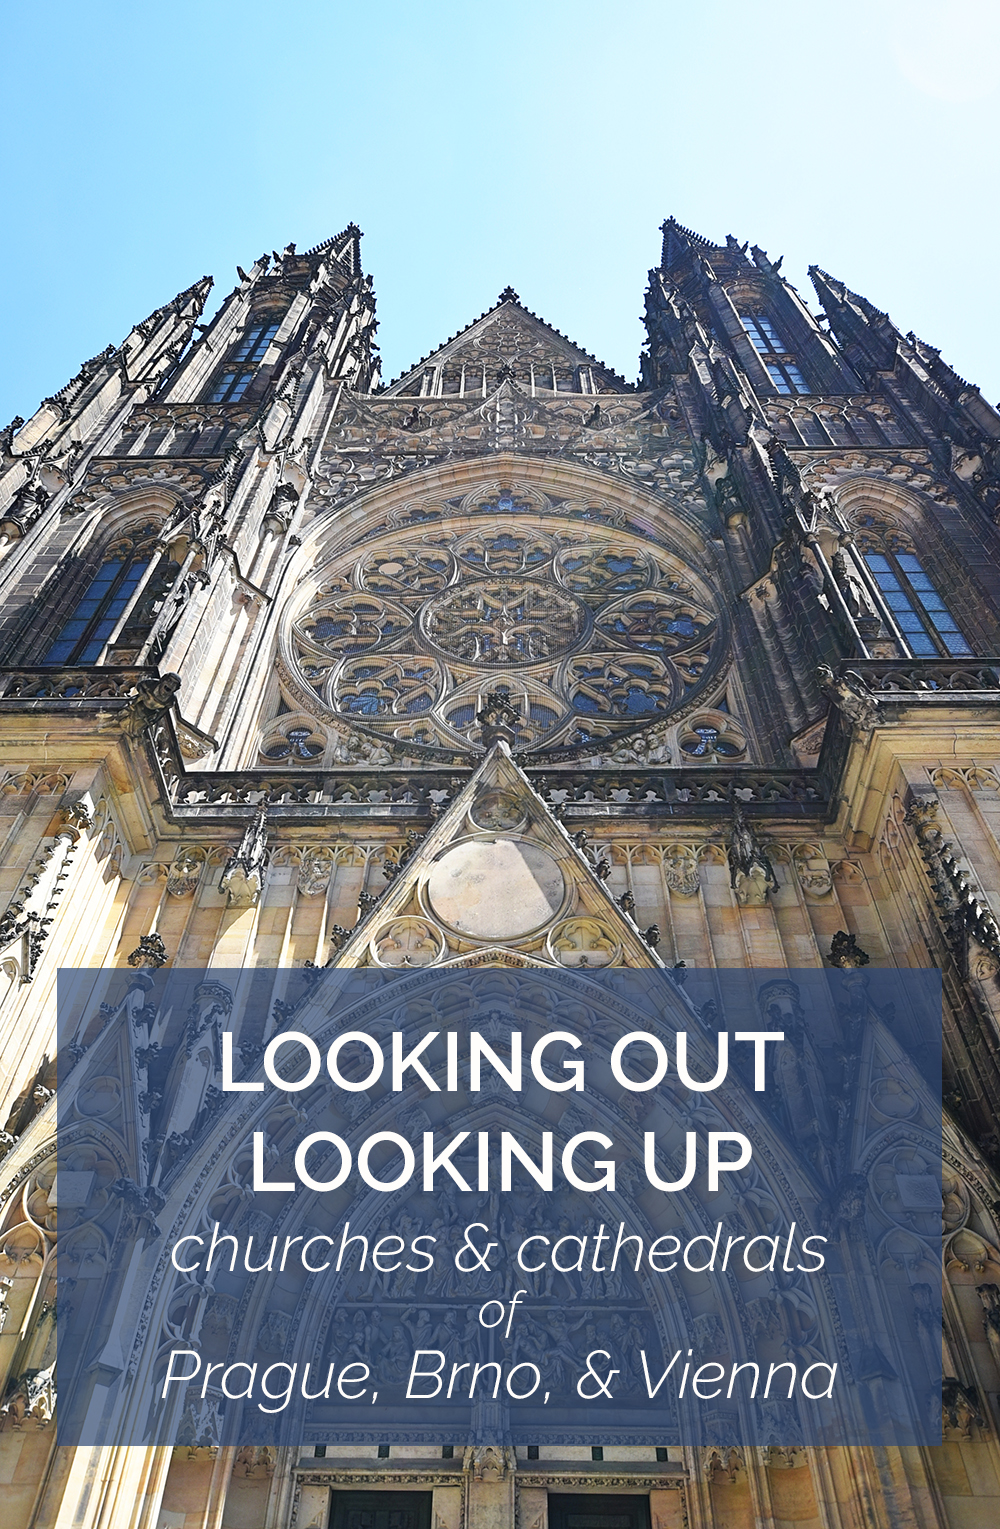 Looking Out, Looking Up: Churches & Cathedrals of Prague, Brno, & Vienna